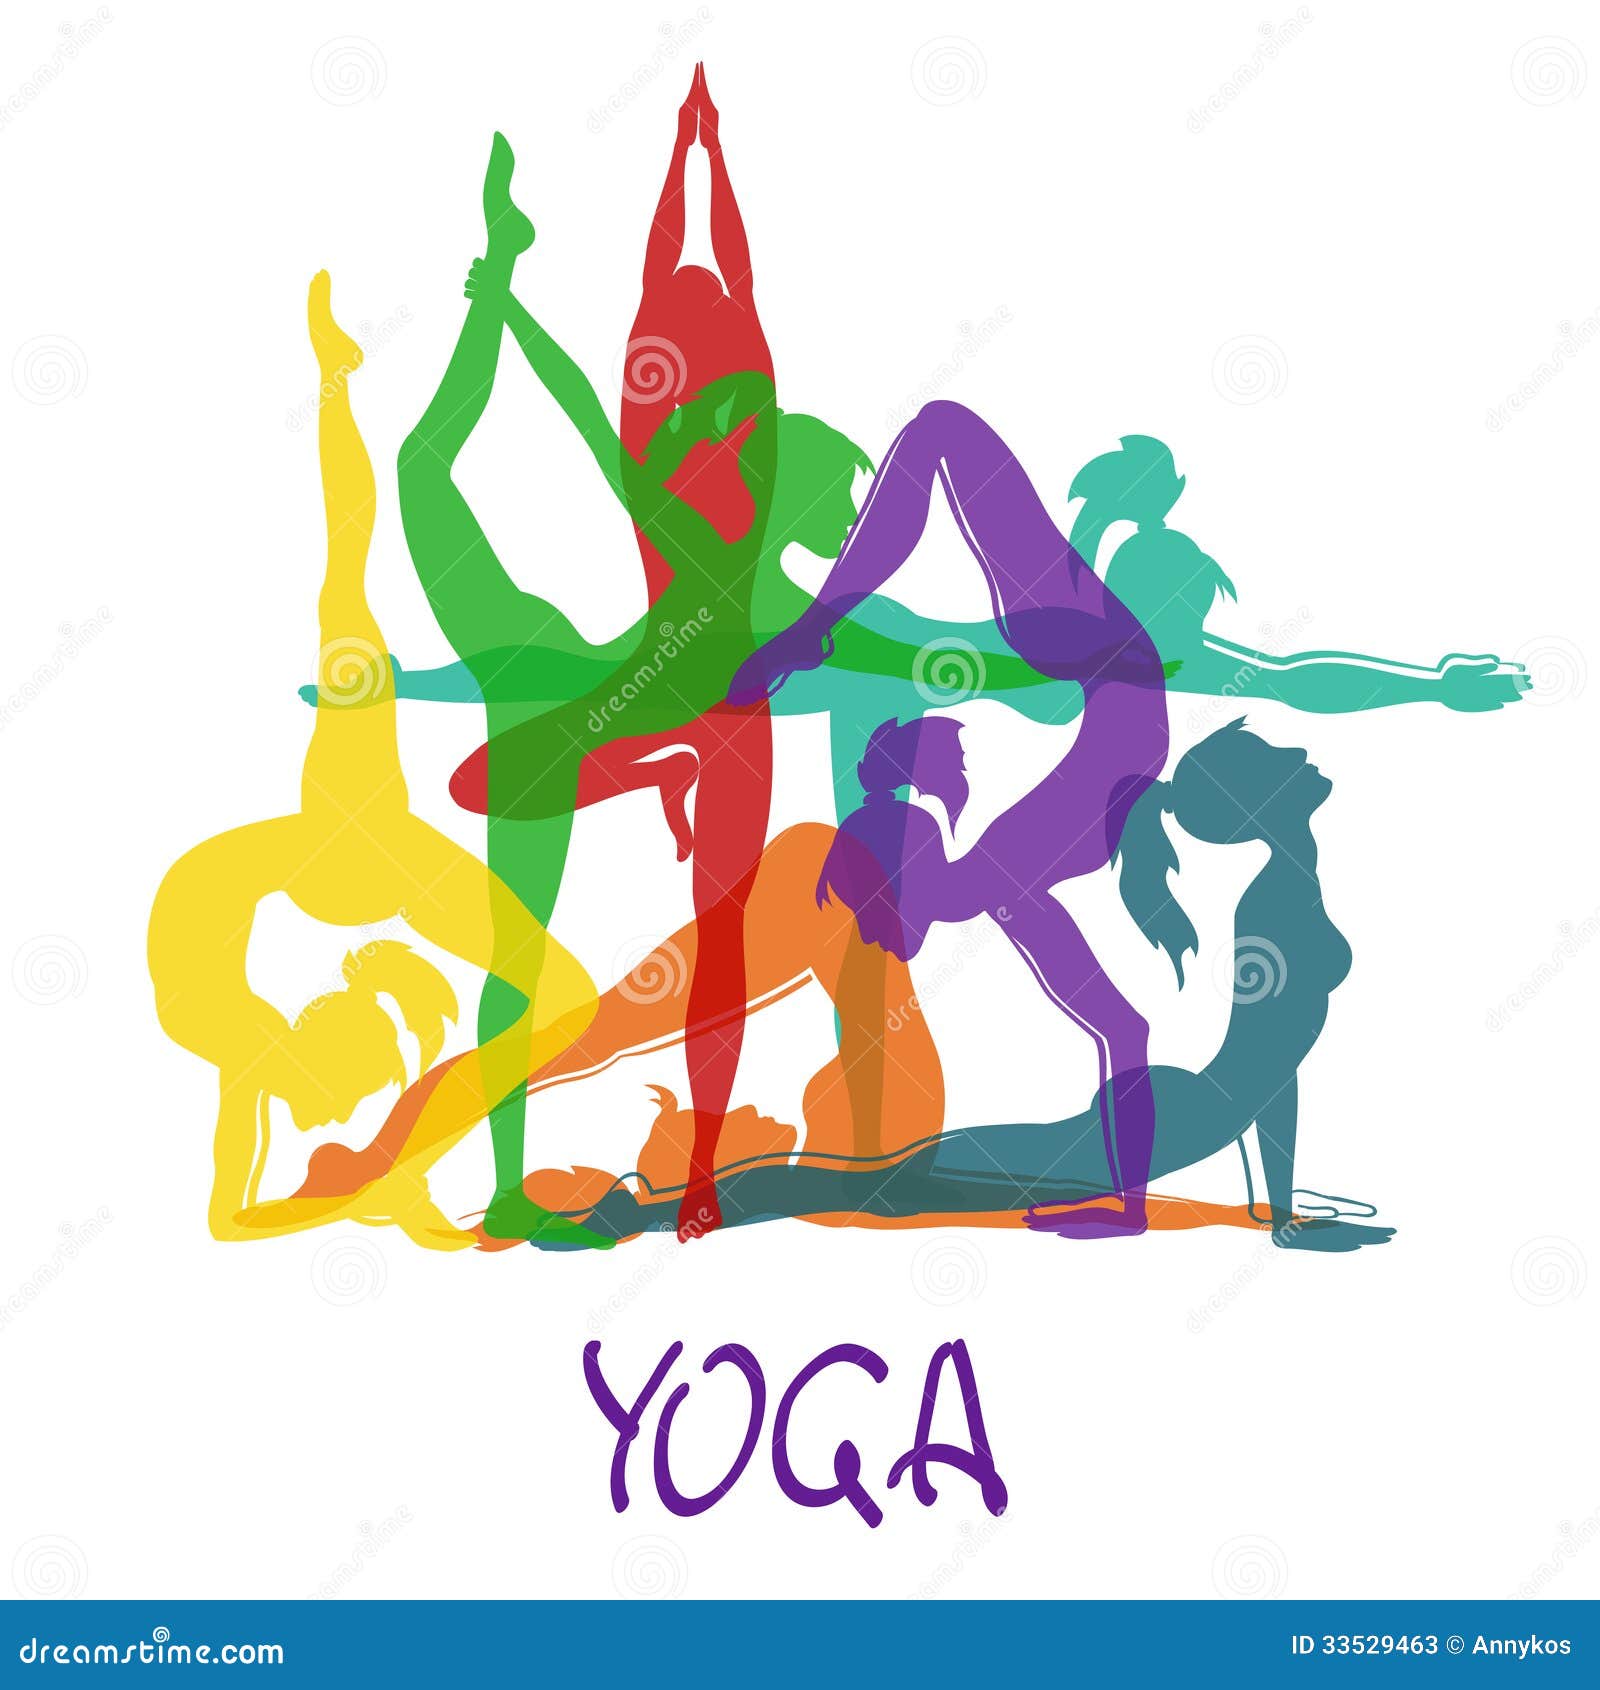 clipart of yoga poses - photo #7